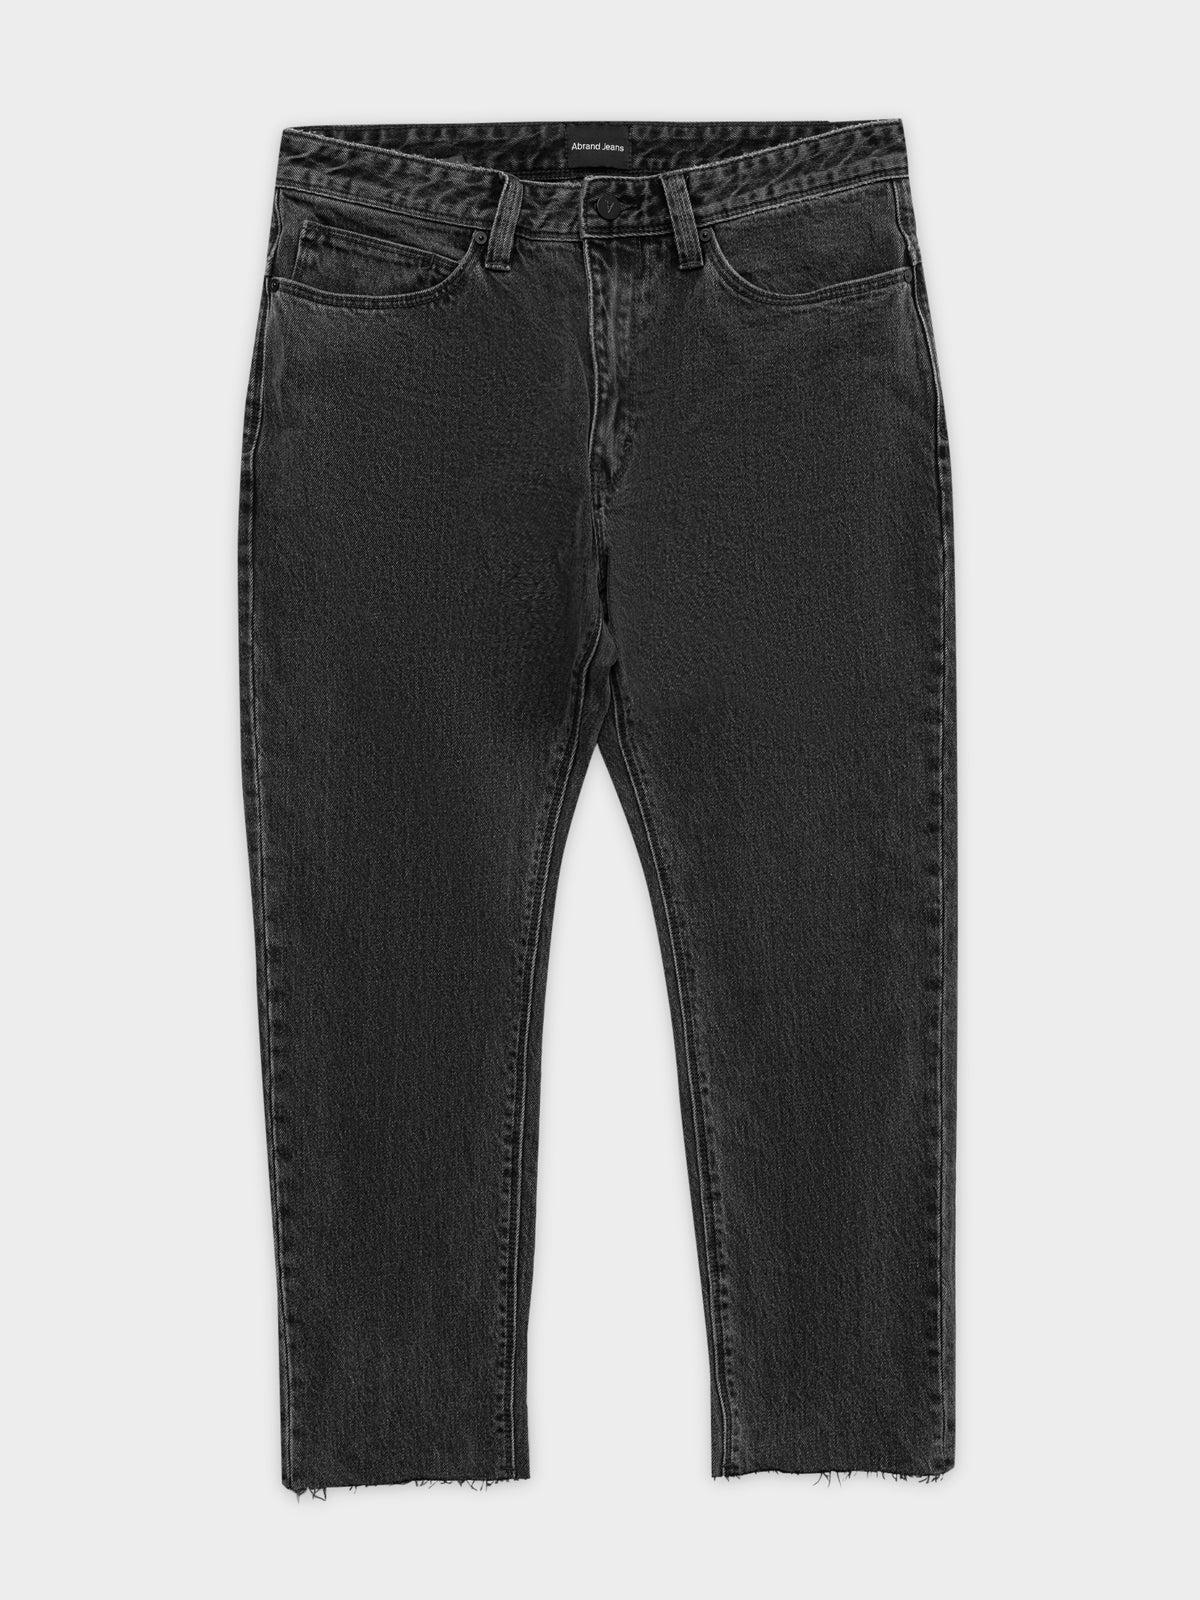 A Cropped Straight Jeans in Bandit Black